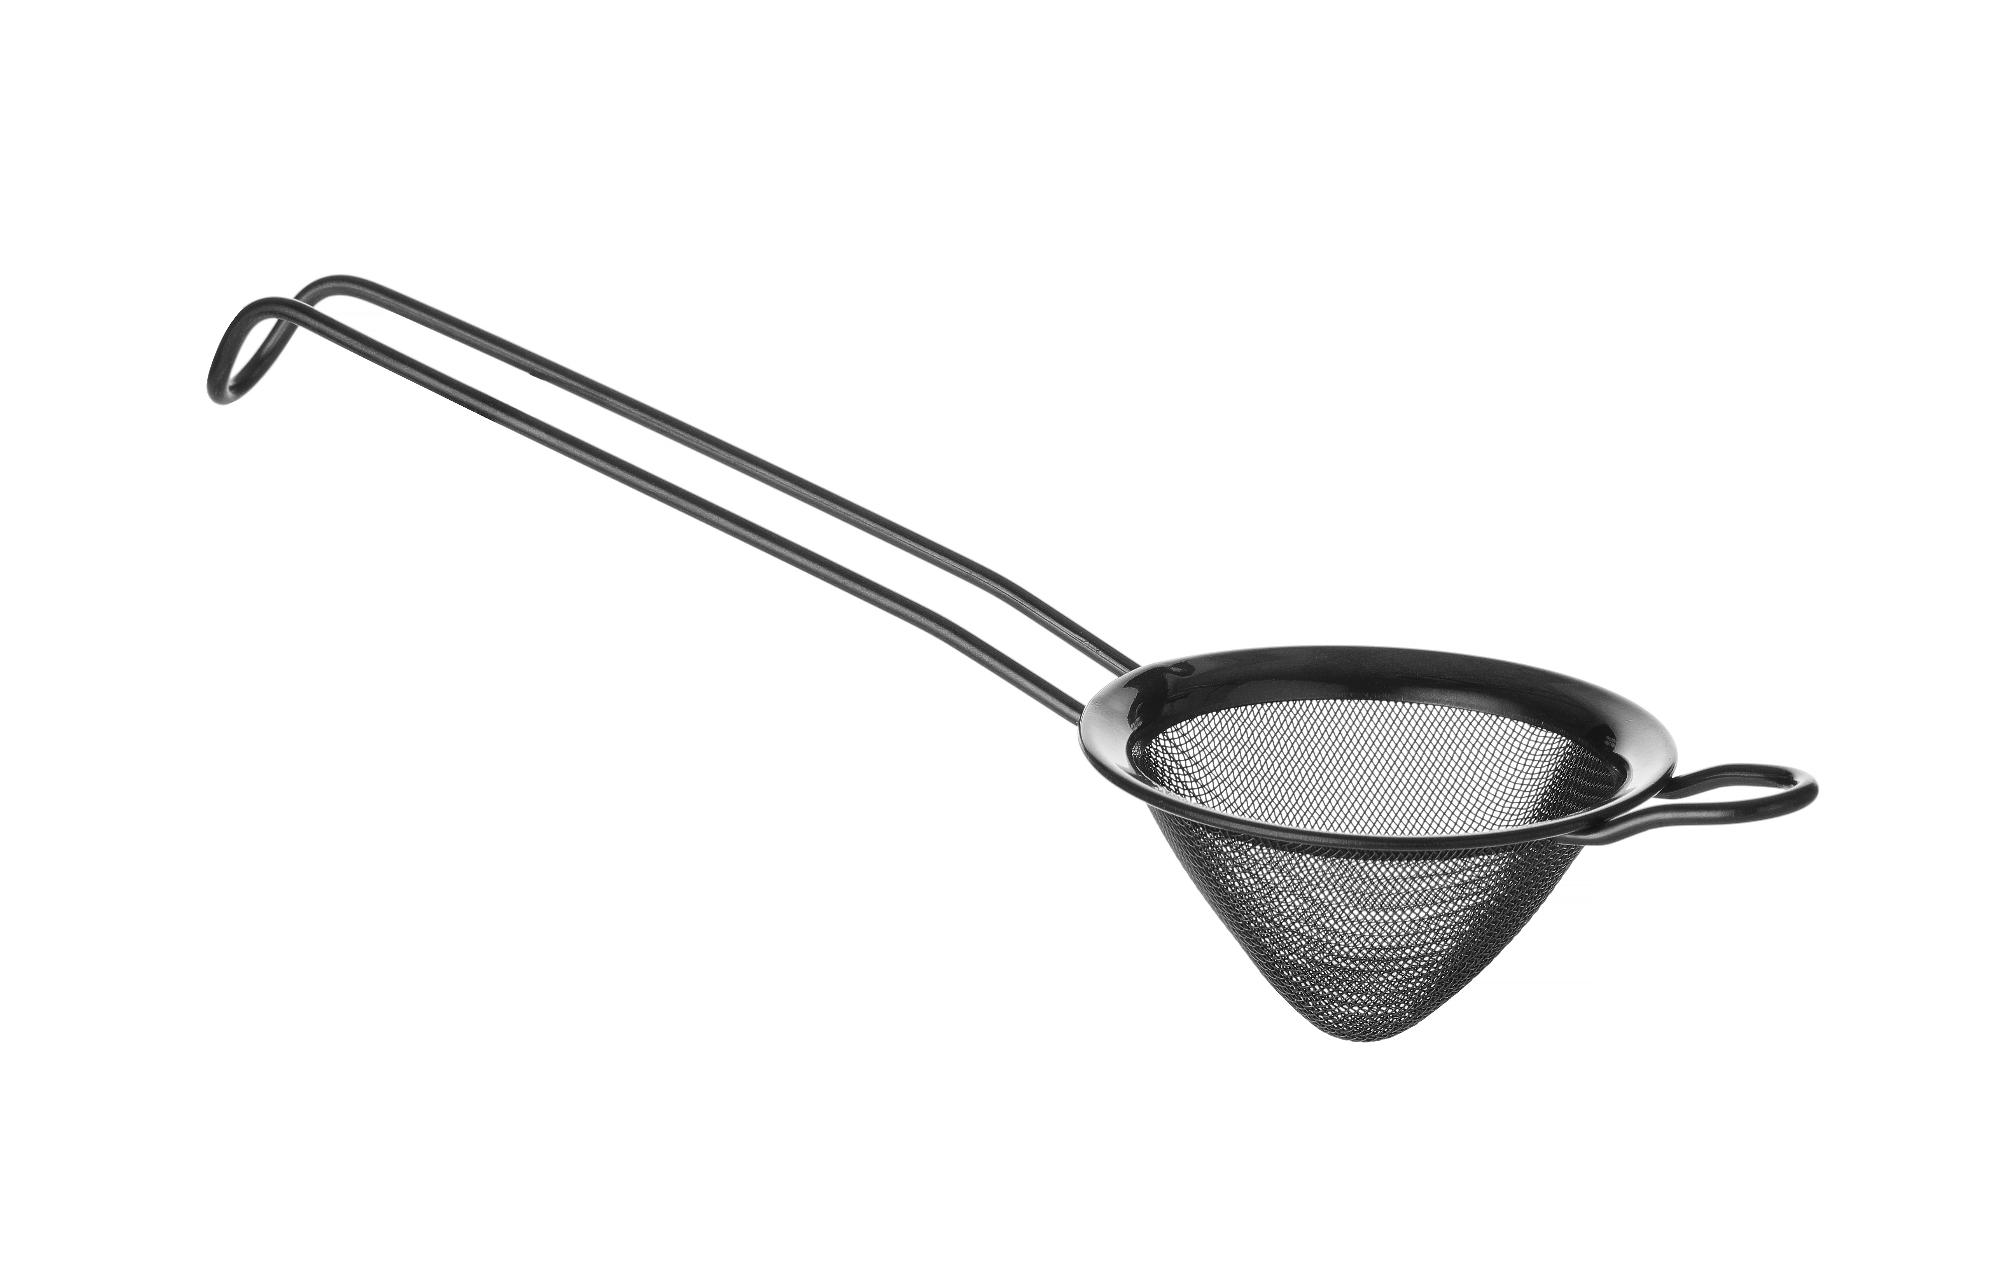 Bar sieve conical PVD coated, Bar up, Black, o75x220mm